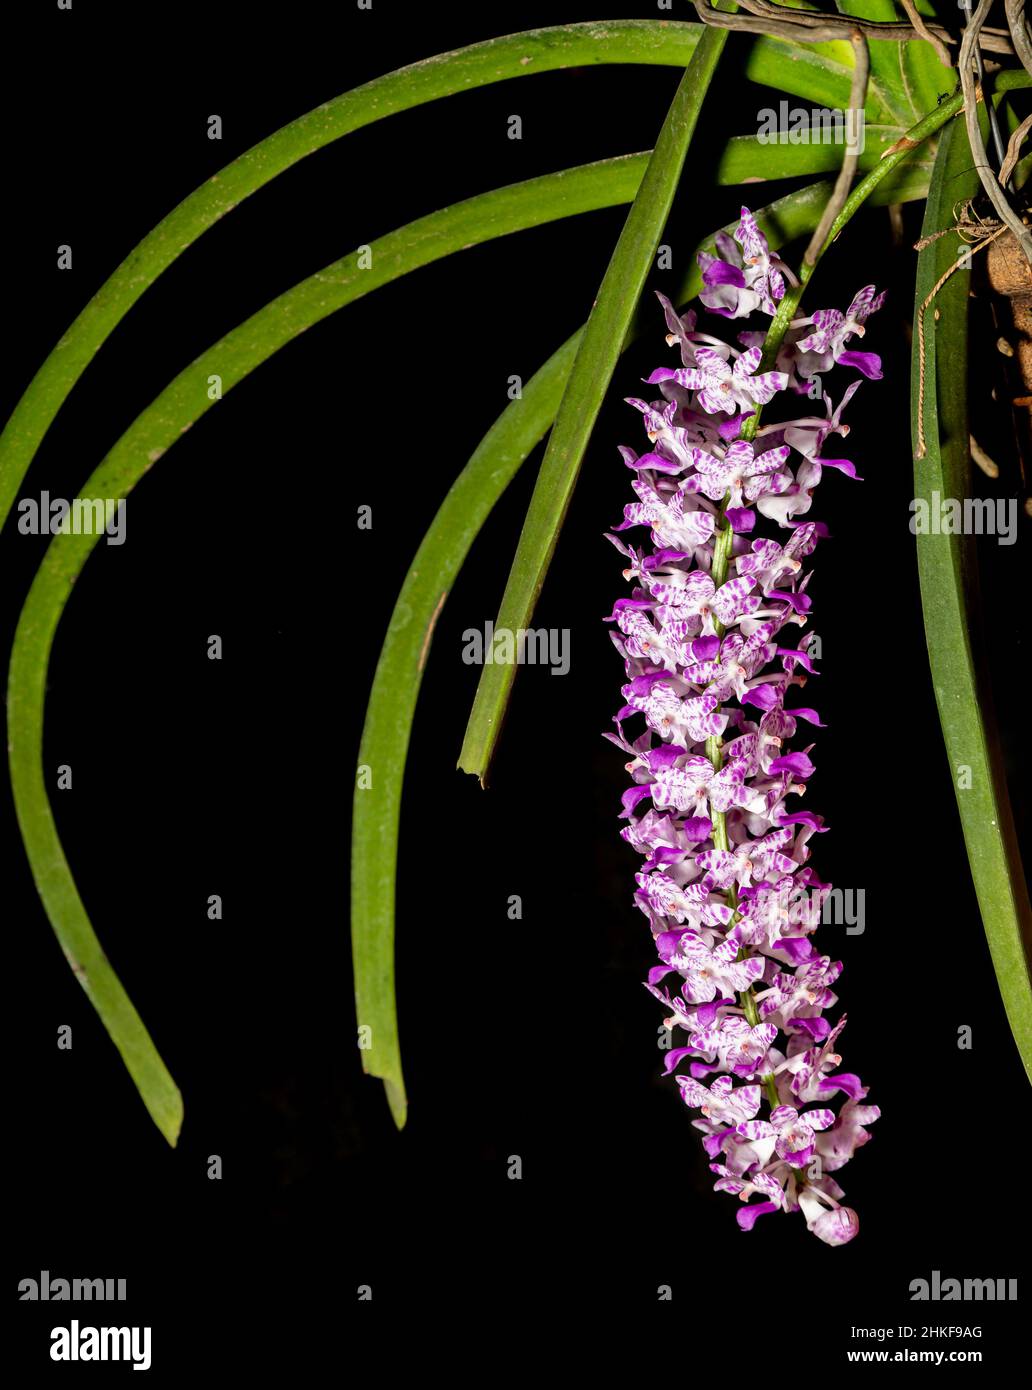 Rhynchostylis Retusa or Foxtail Orchid Stock Photo